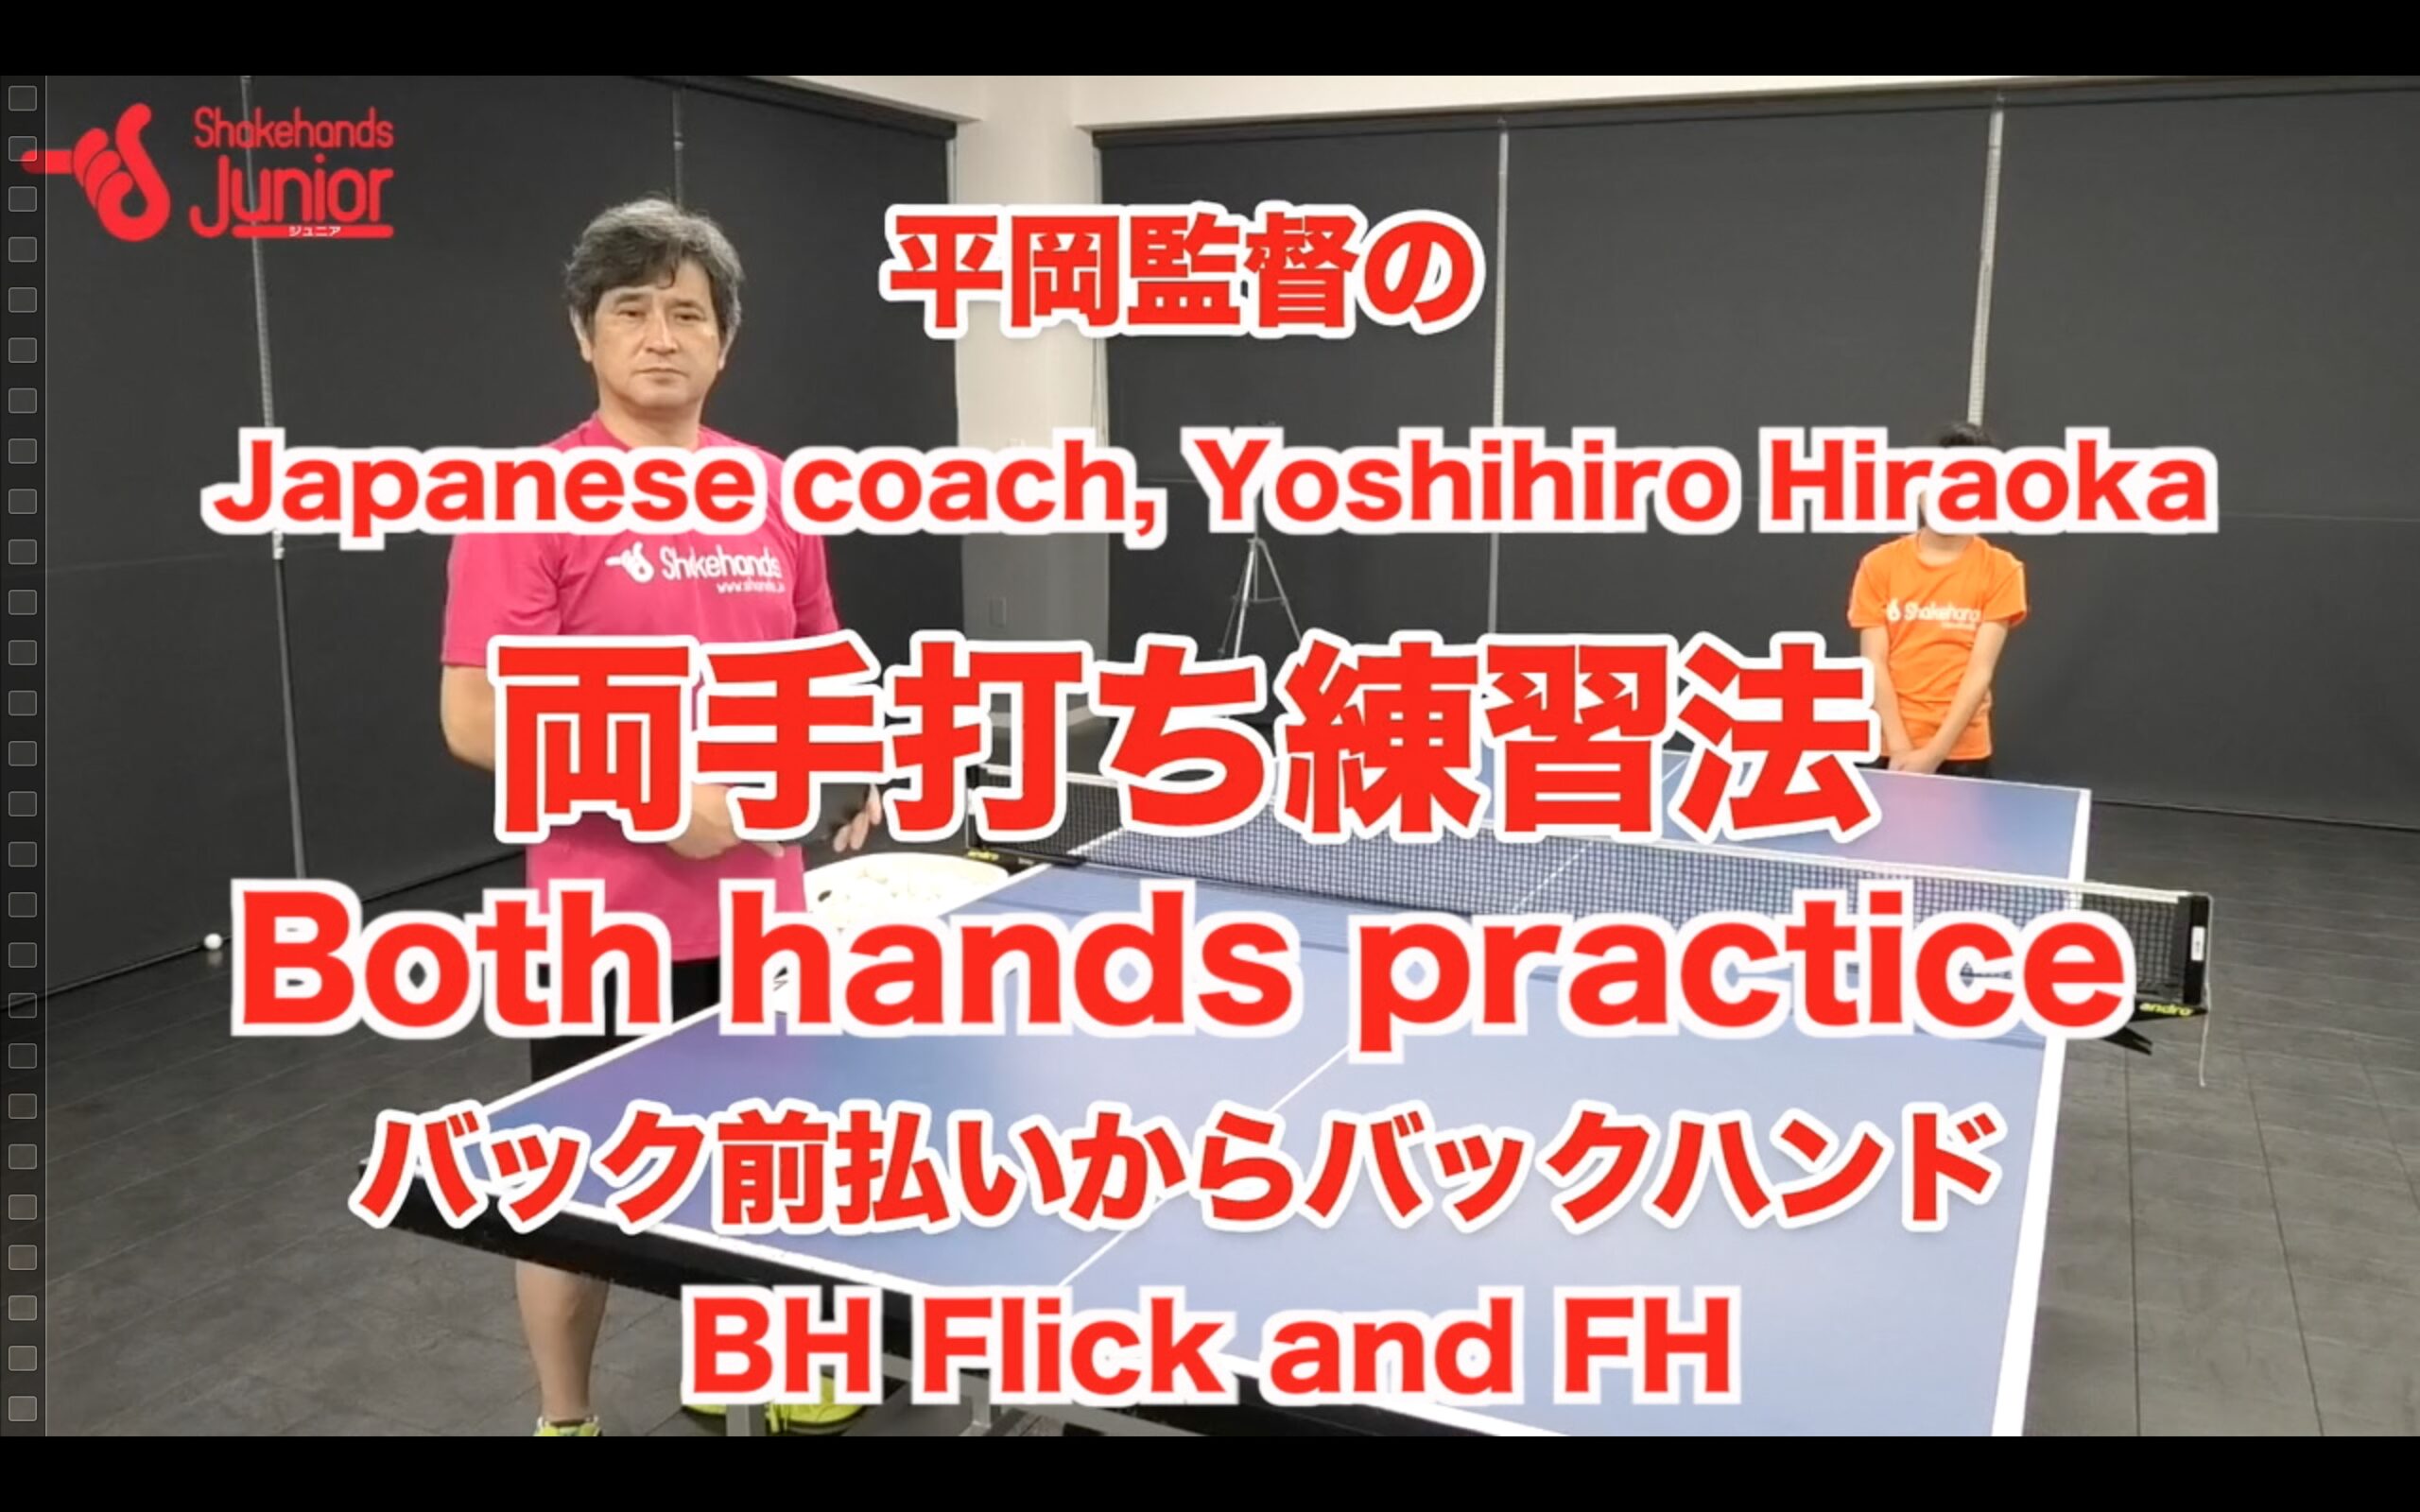 Both hands pracrice BH flick and FH